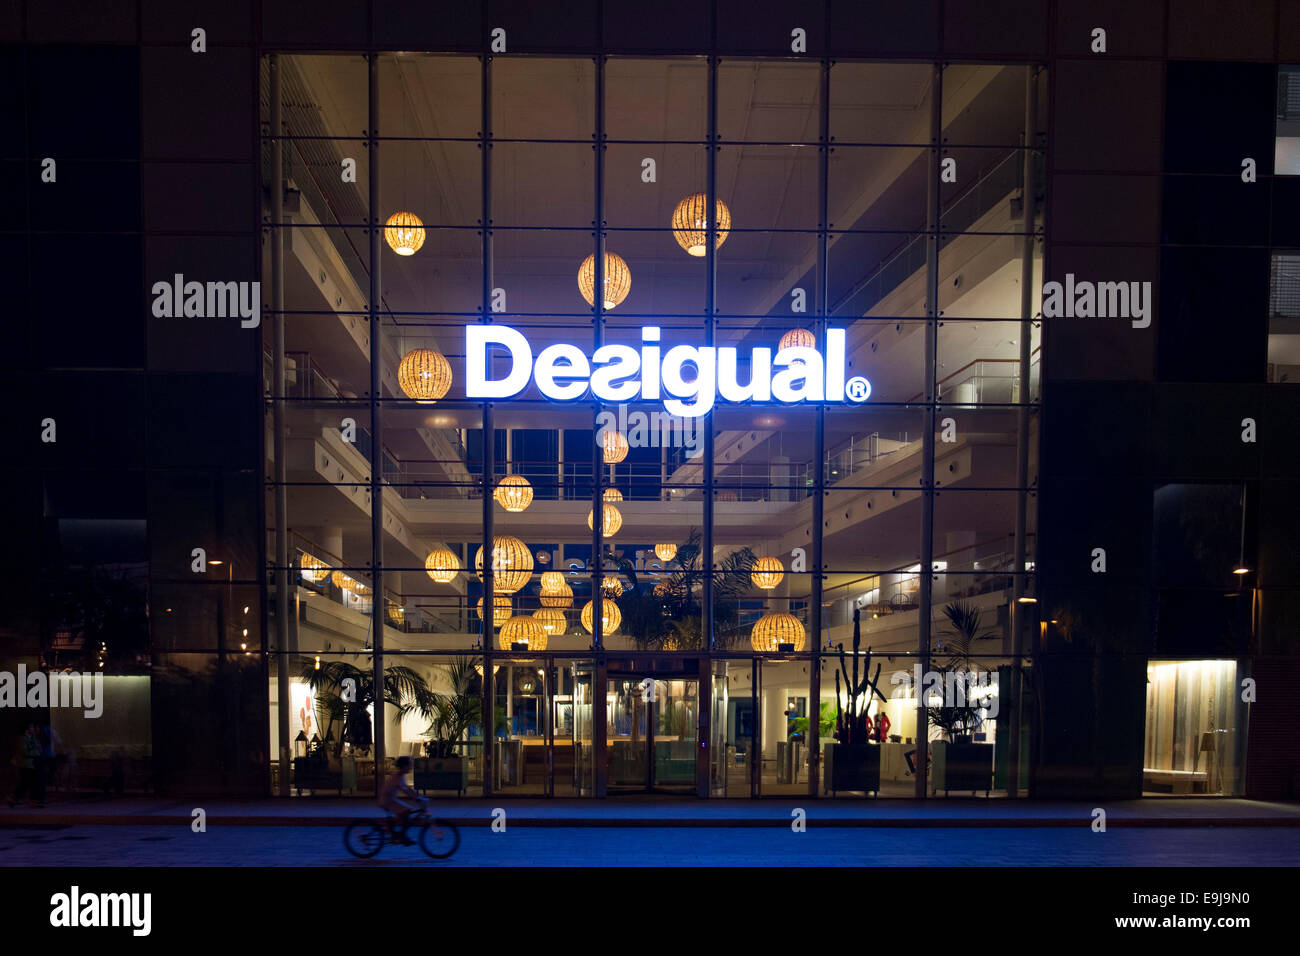 The Desigual clothes fashion shop store in Barcelona, Spain Stock Photo